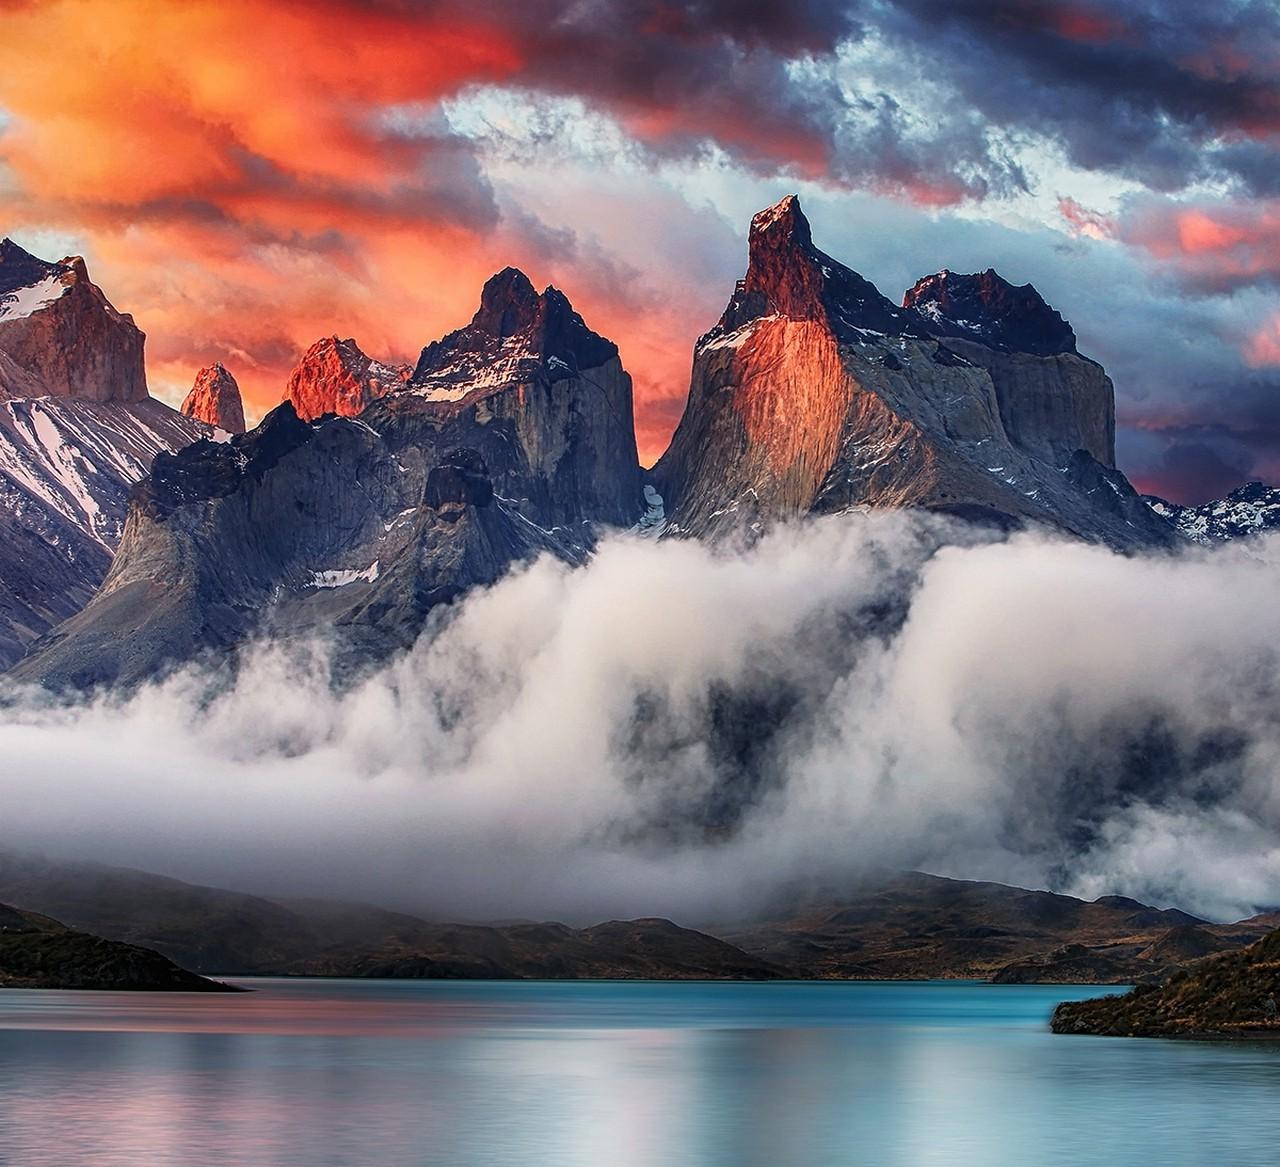 Mountain, Torres Del Paine, Patagonia, Chile, Sunrise, Clouds, Lake